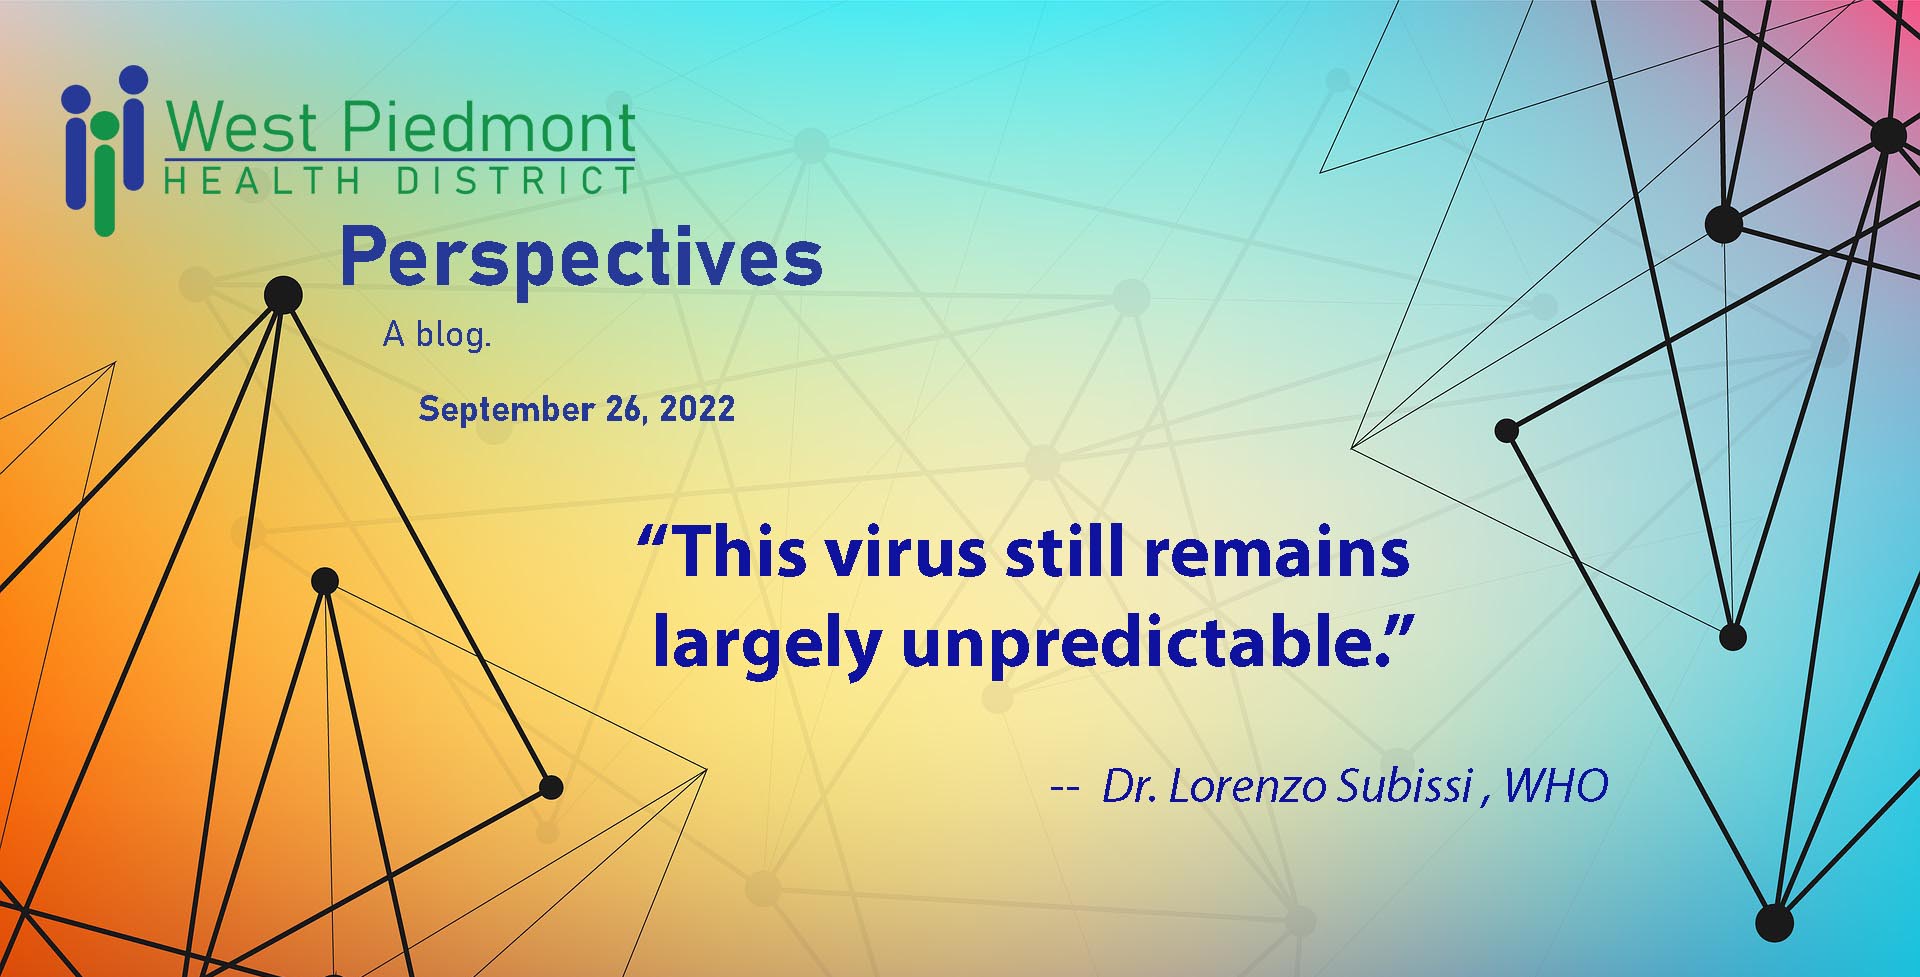 WP Cover Quote: This virus remains largely unpredictable."